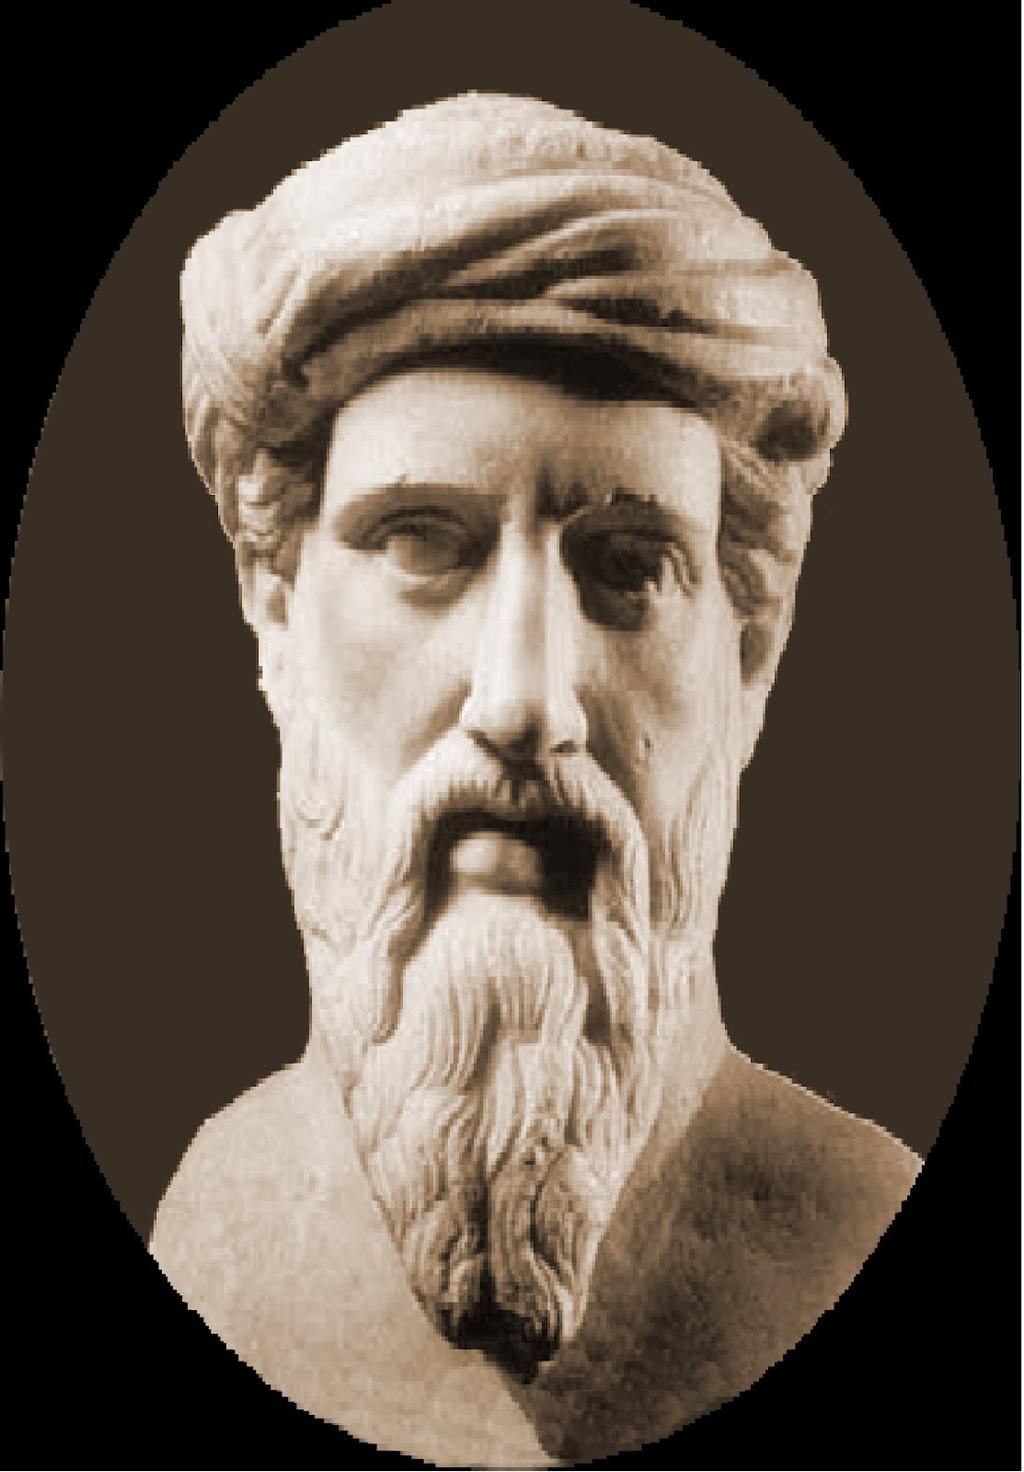 PYTHAGORAS OF SAMOS Pythagoras of Samos was born in Samos about 570 BC. He worked as a philosopher and mathematician.